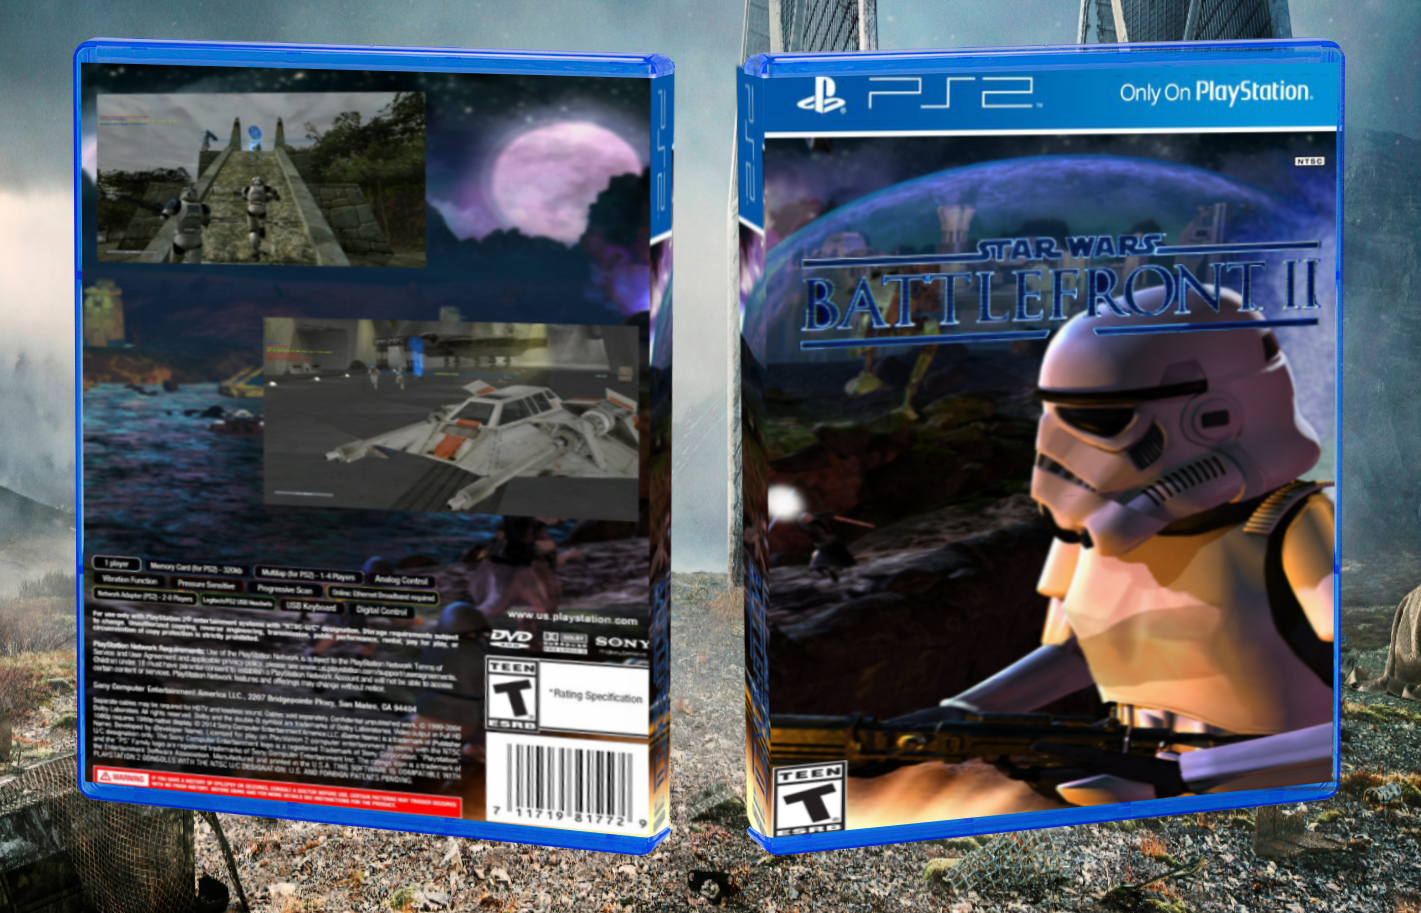 Star wars battlefront 2 classic box cover